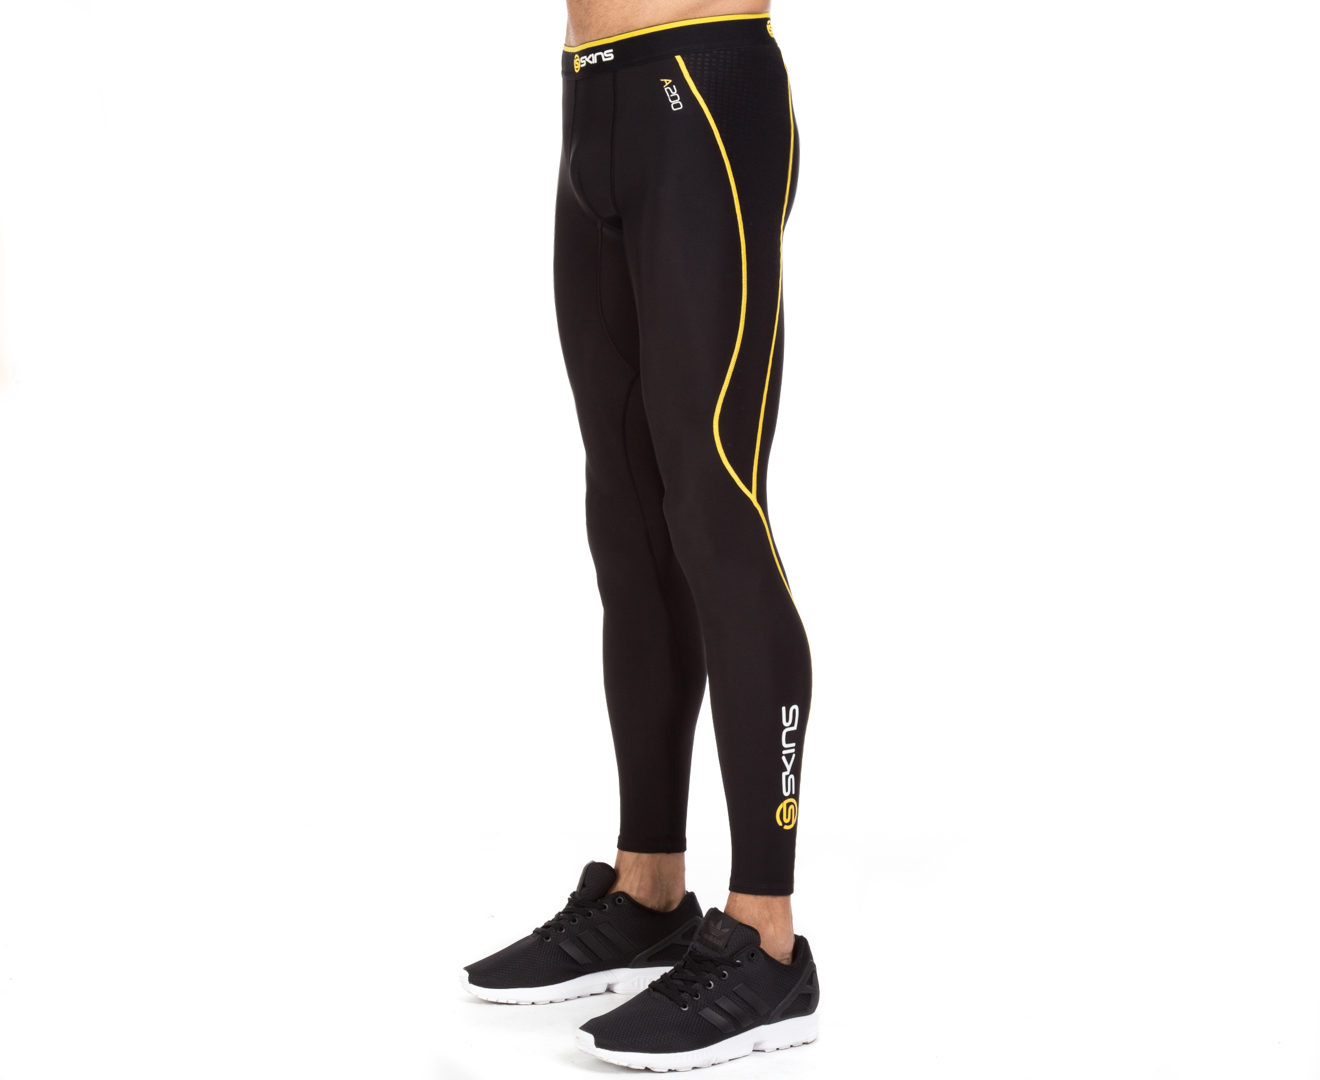 Skins Mens Compression Long Tight A-200 Black/Yellow Size XL